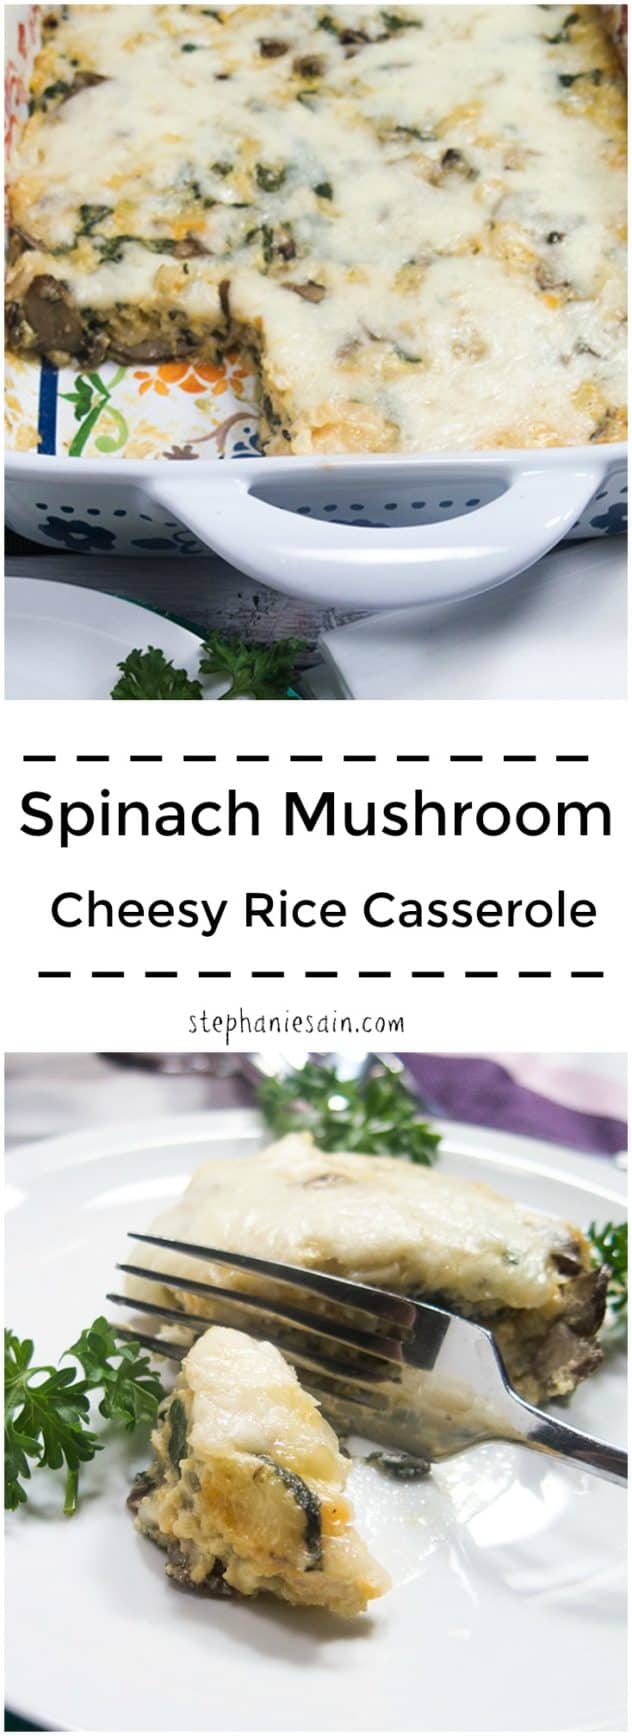 Spinach Mushroom Cheesy Rice Casserole is easy to prepare for a tasty side or weeknight dinner. Spinach, mushrooms, cheese , and rice combined for a healthy family friendly dish. Vegetarian and Gluten Free.